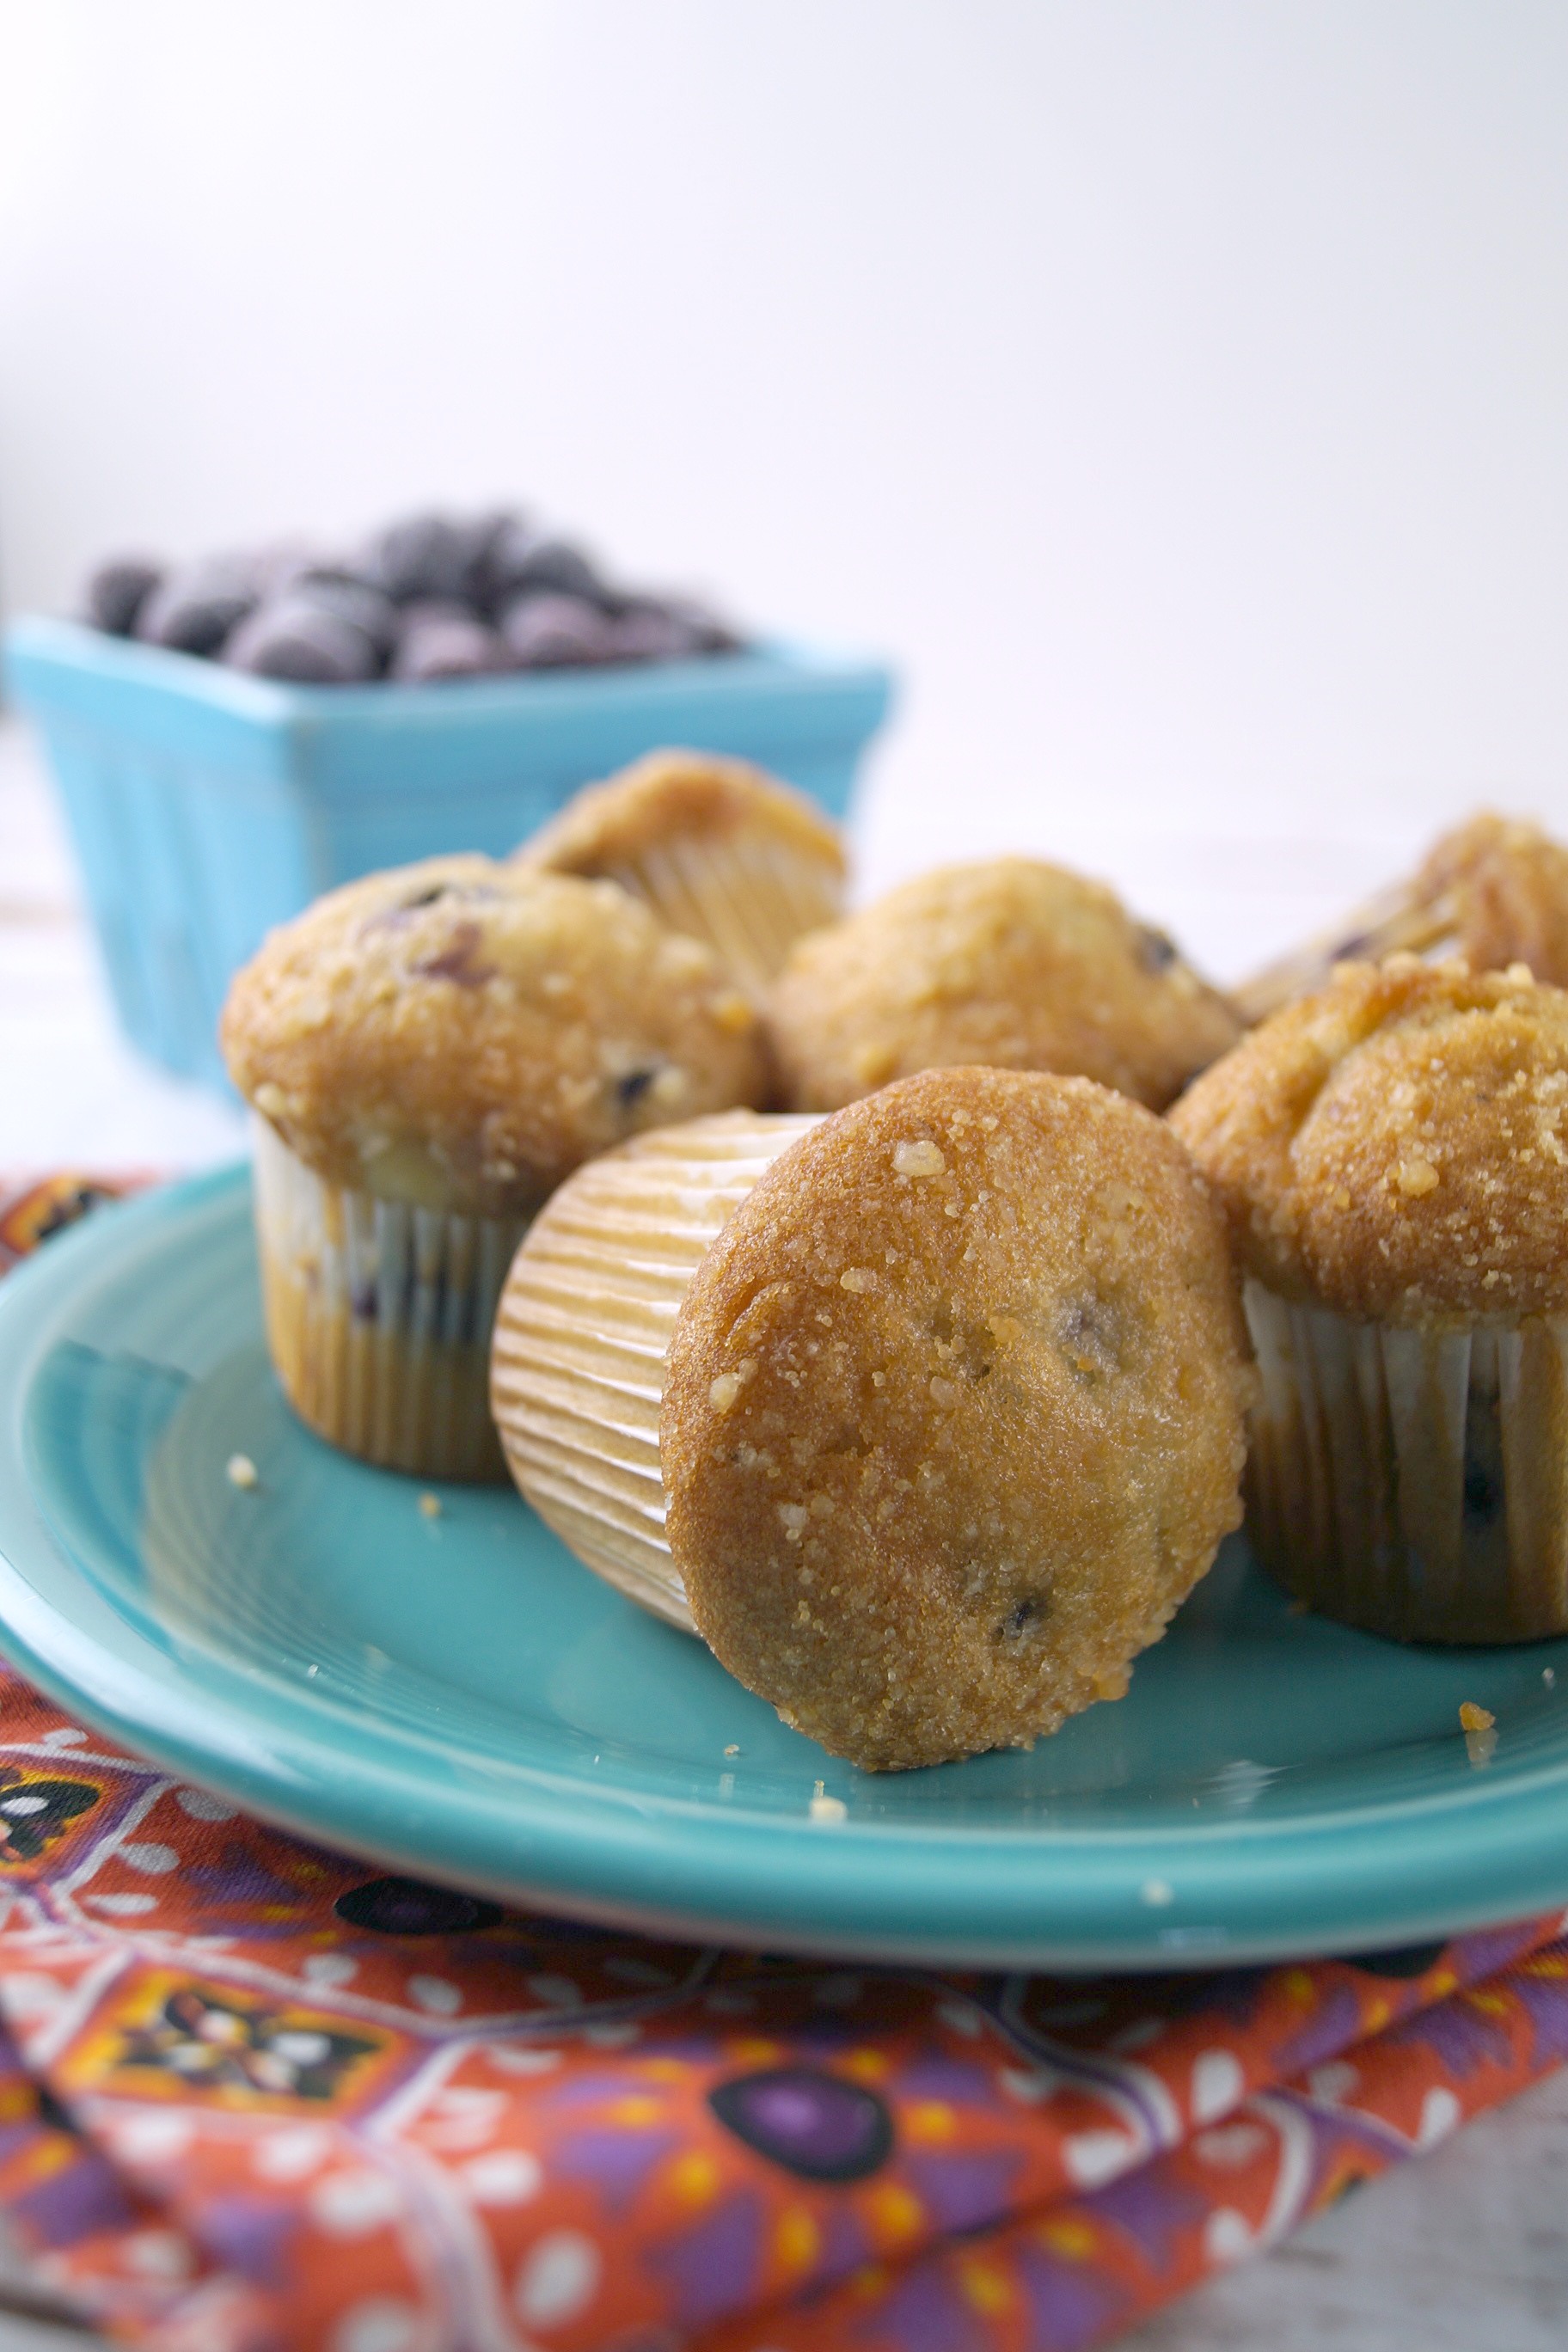 These delicious Sweet Cream Blueberry Muffins will add a #SplashOfDelight to your day! This recipe is so easy, make some today! #ad